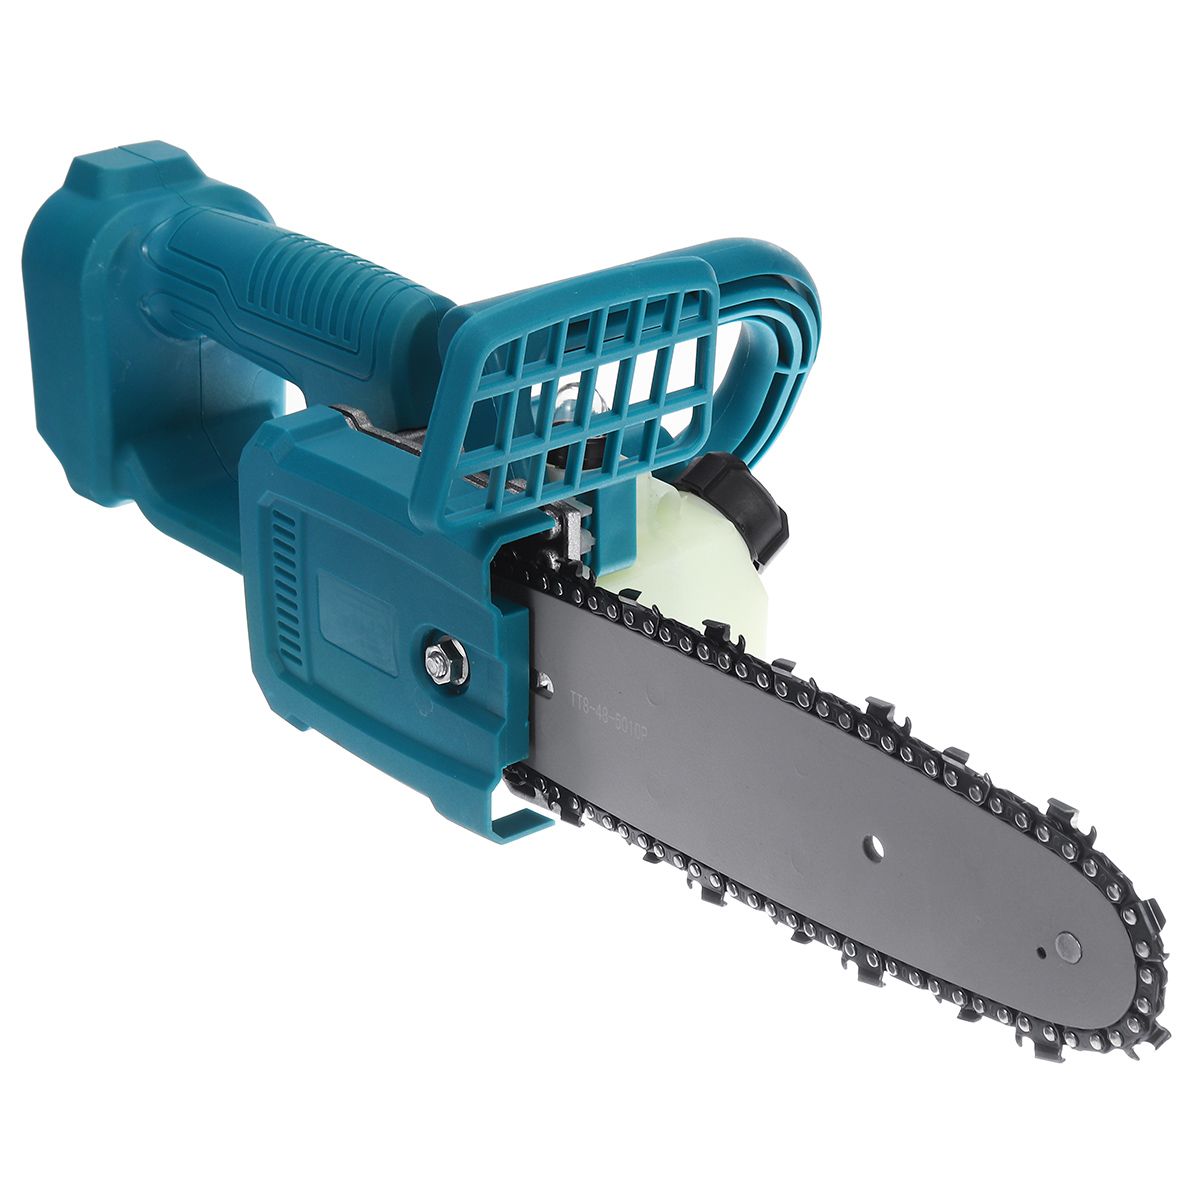 Woodworking-Electric-Chain-Saw-Portable-Wood-Cutting-Pruning-Tool-Without-Battery-1743313